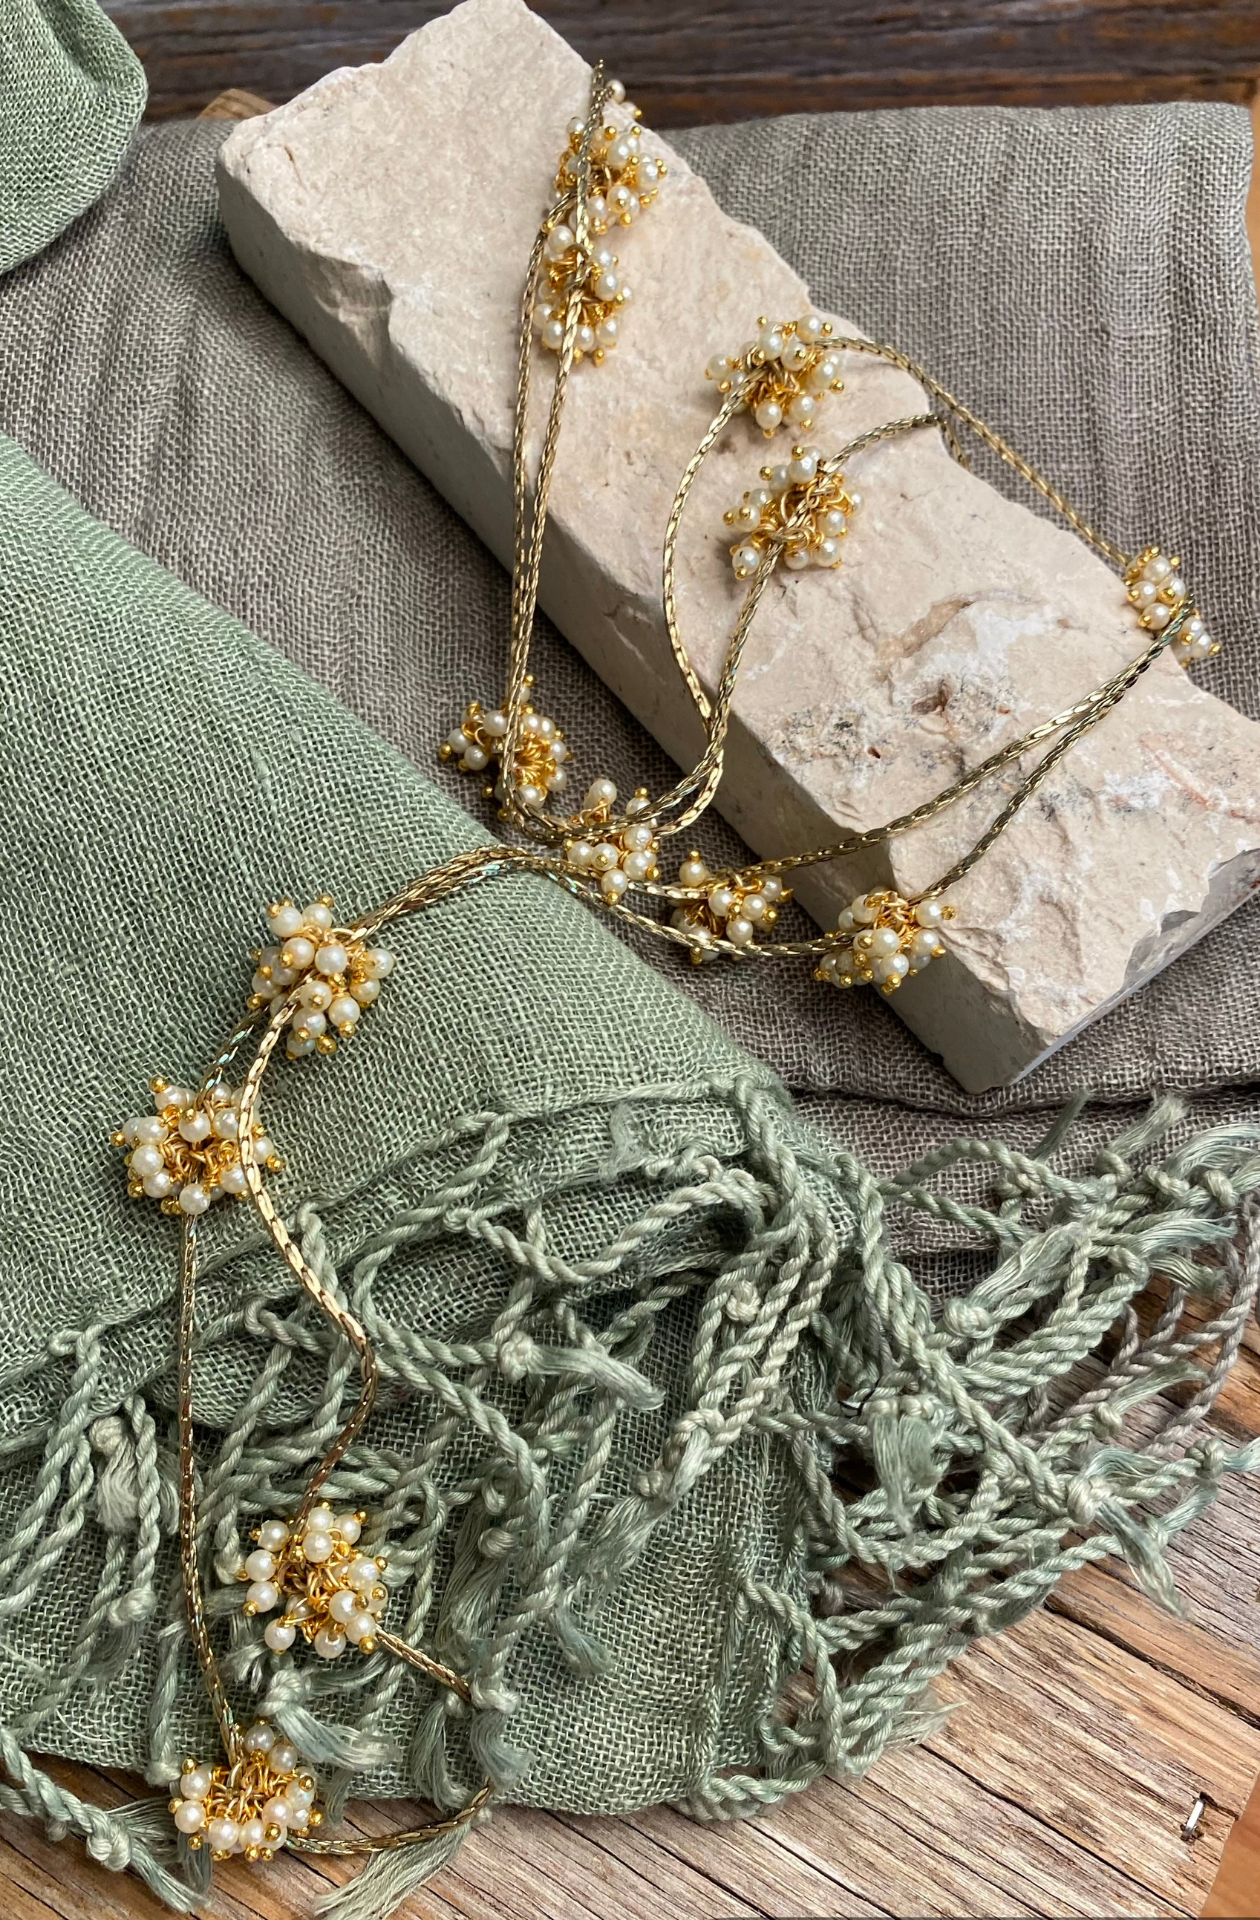 sage green and jungle moss linen scarves sit on a table with a necklace draped over top. The close up shot shows the twisted tassel details on the end of each scarf.